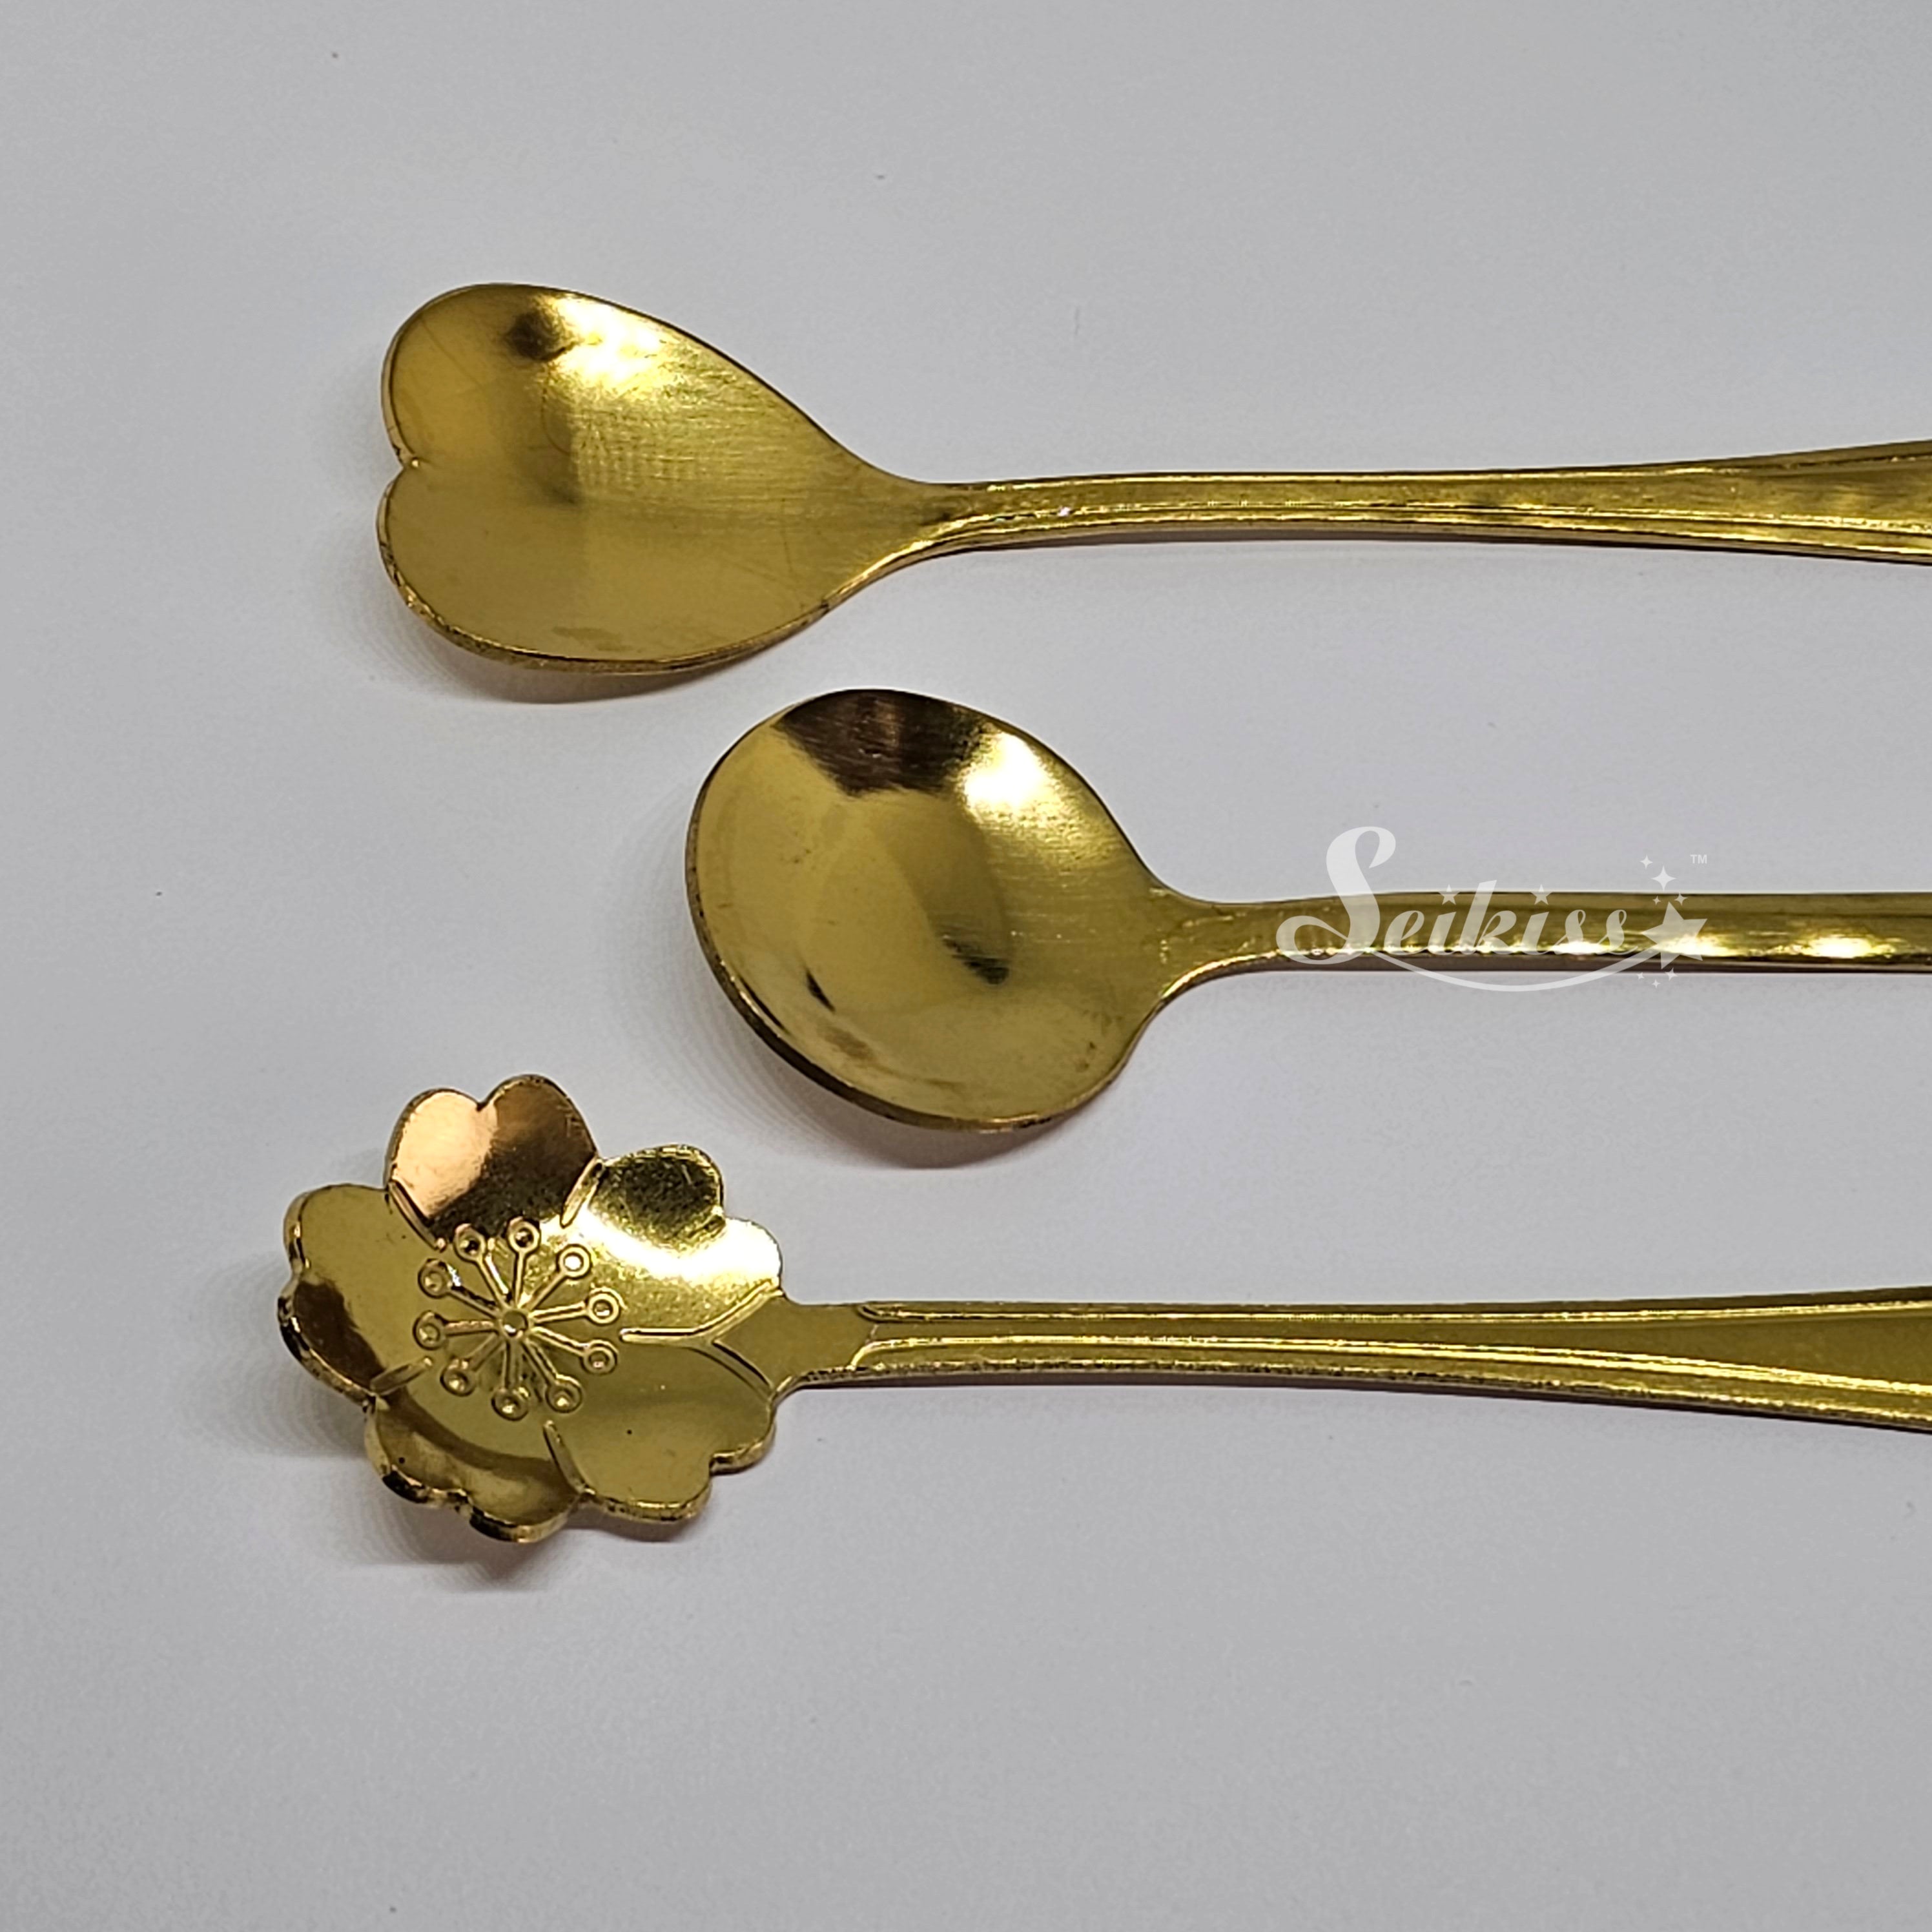 Spoon Set for Craft - GOLD